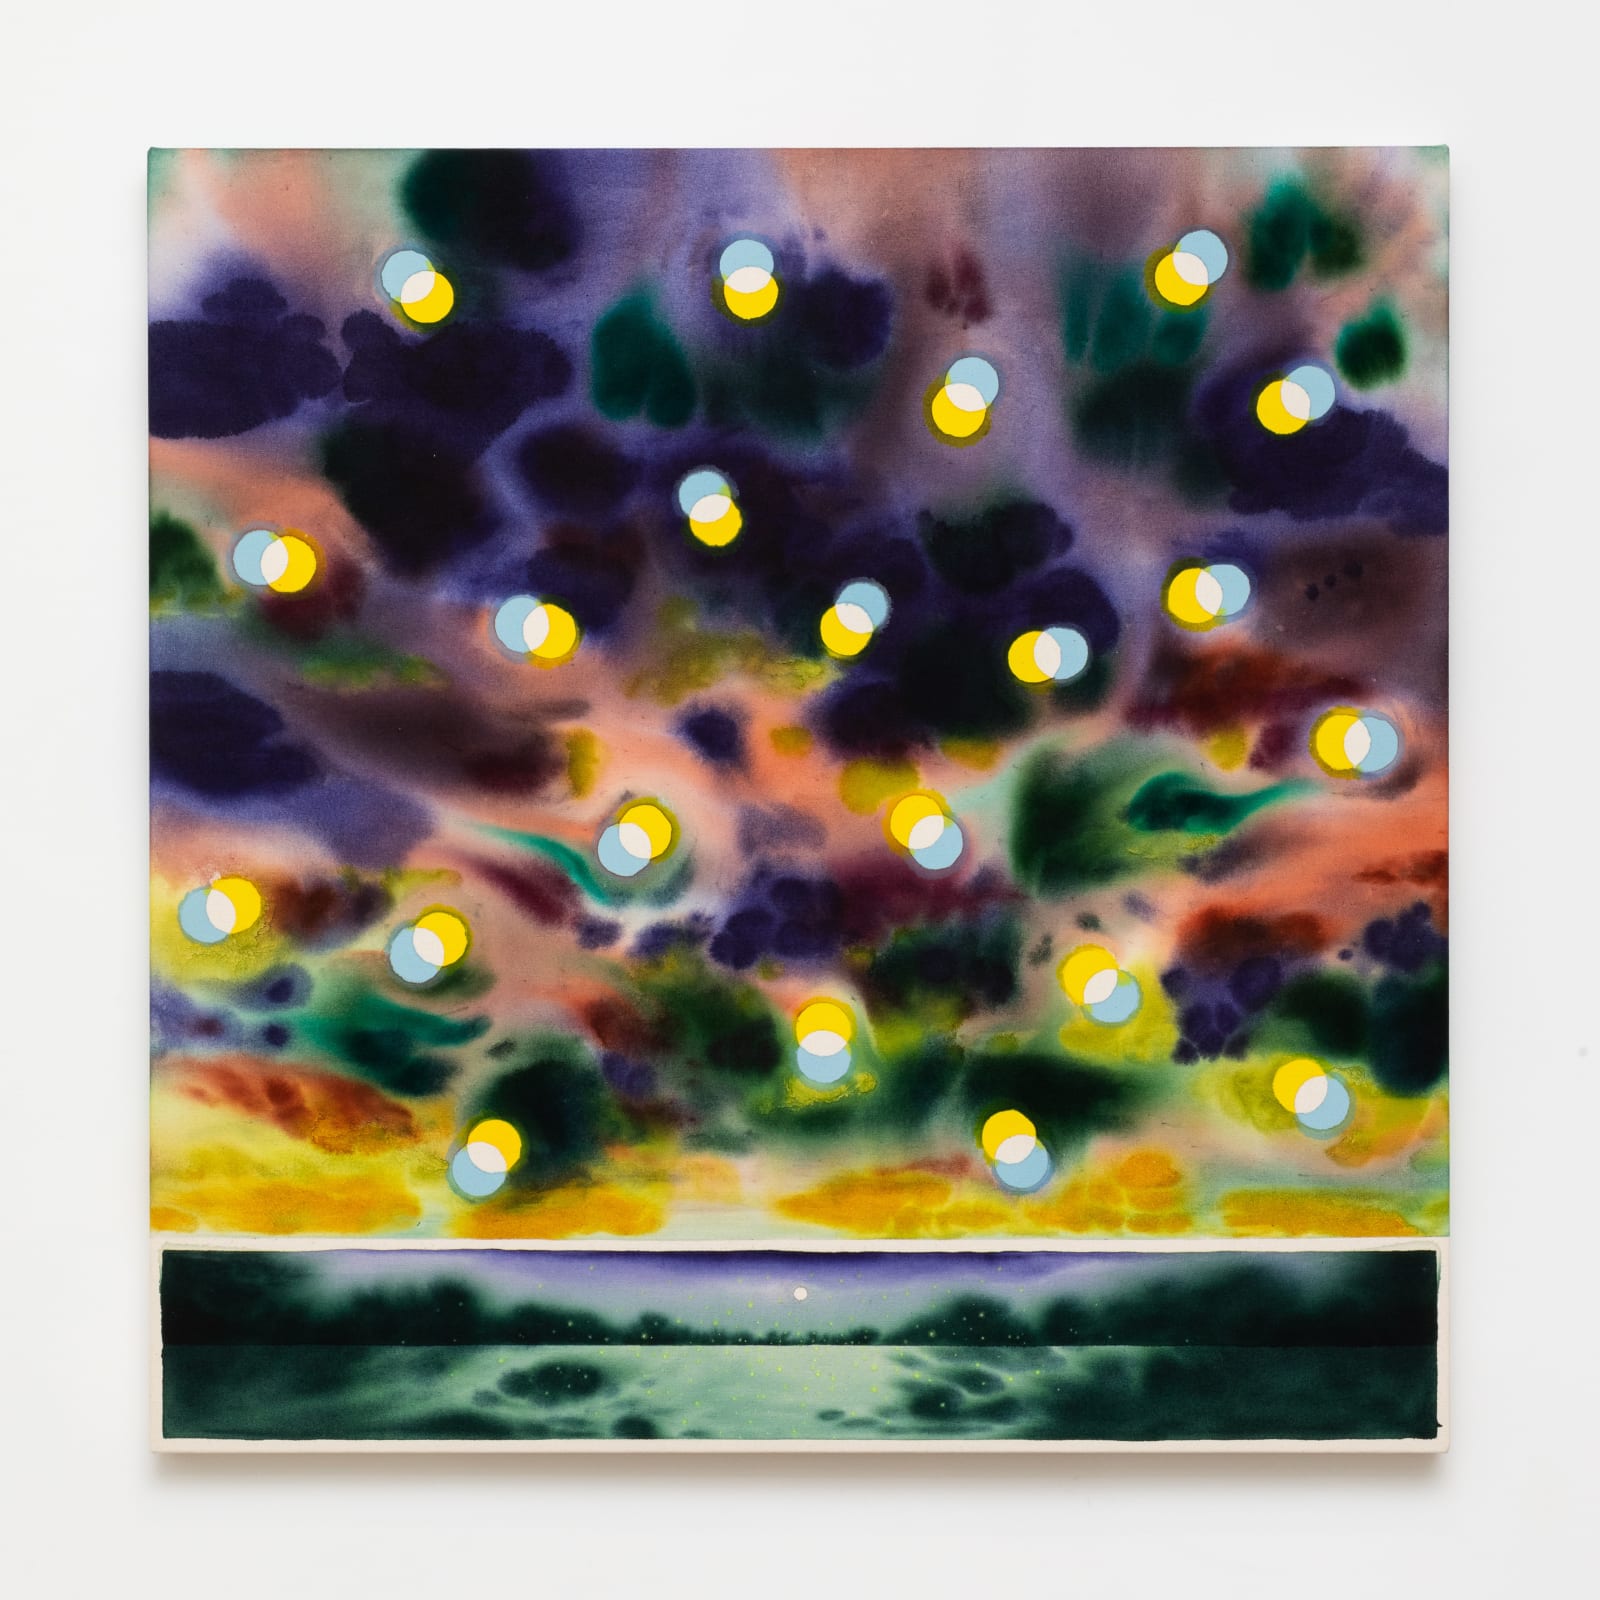 Painting showing a landscape looking at the sea and the sky at dusk filled with pattern of paired intertwined circles in blue and yellow, resembling lightning bugs.